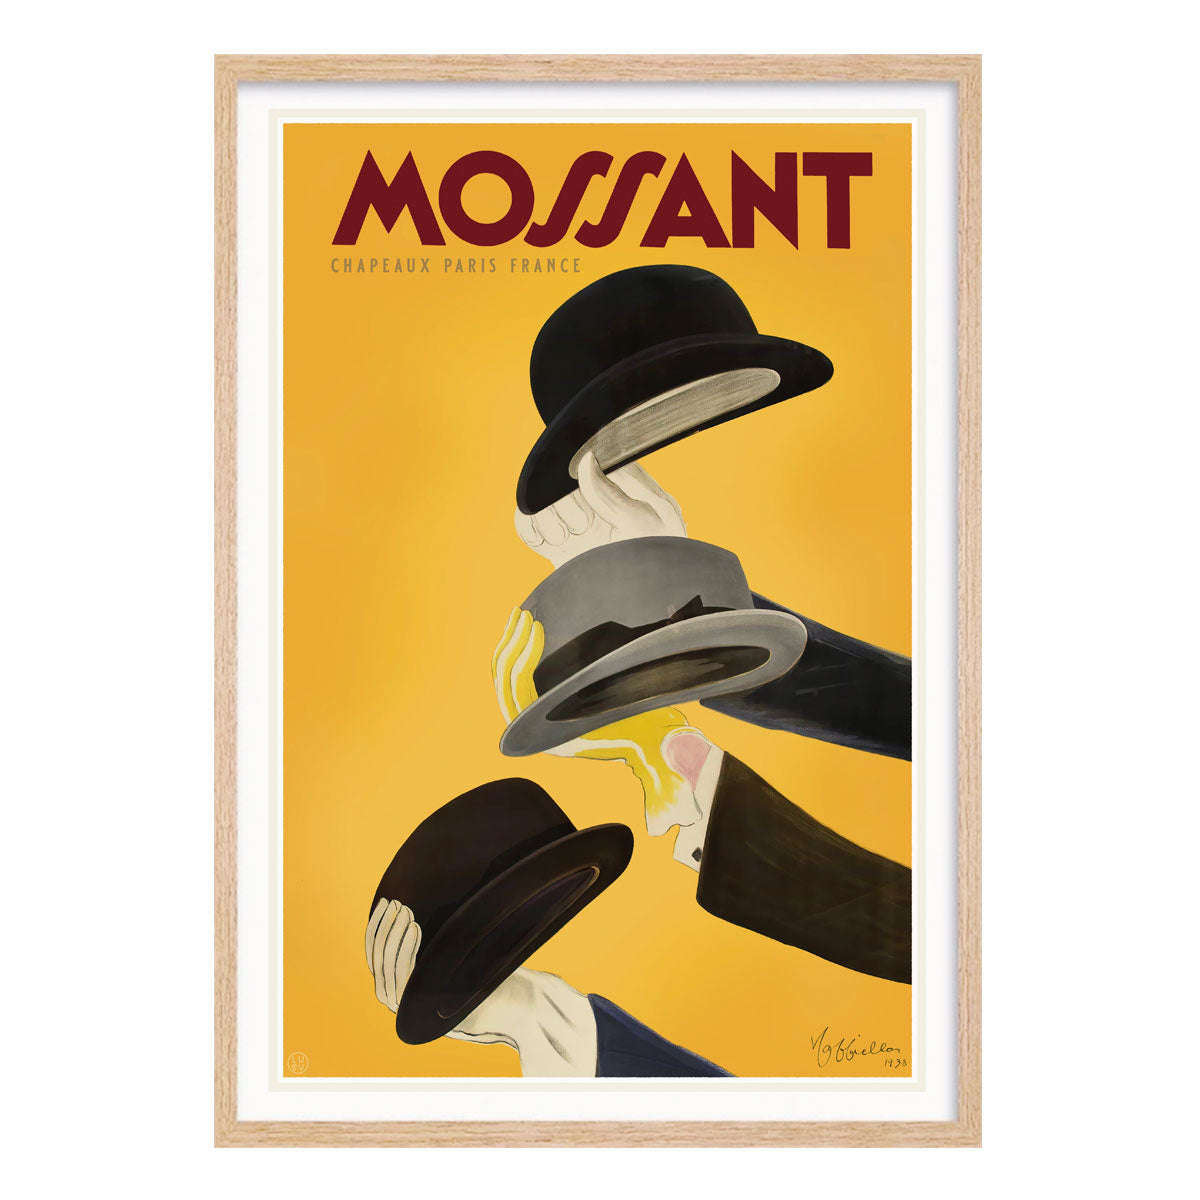 Mossant hats France vintage retro advertising print in oak frame from Places We Luv